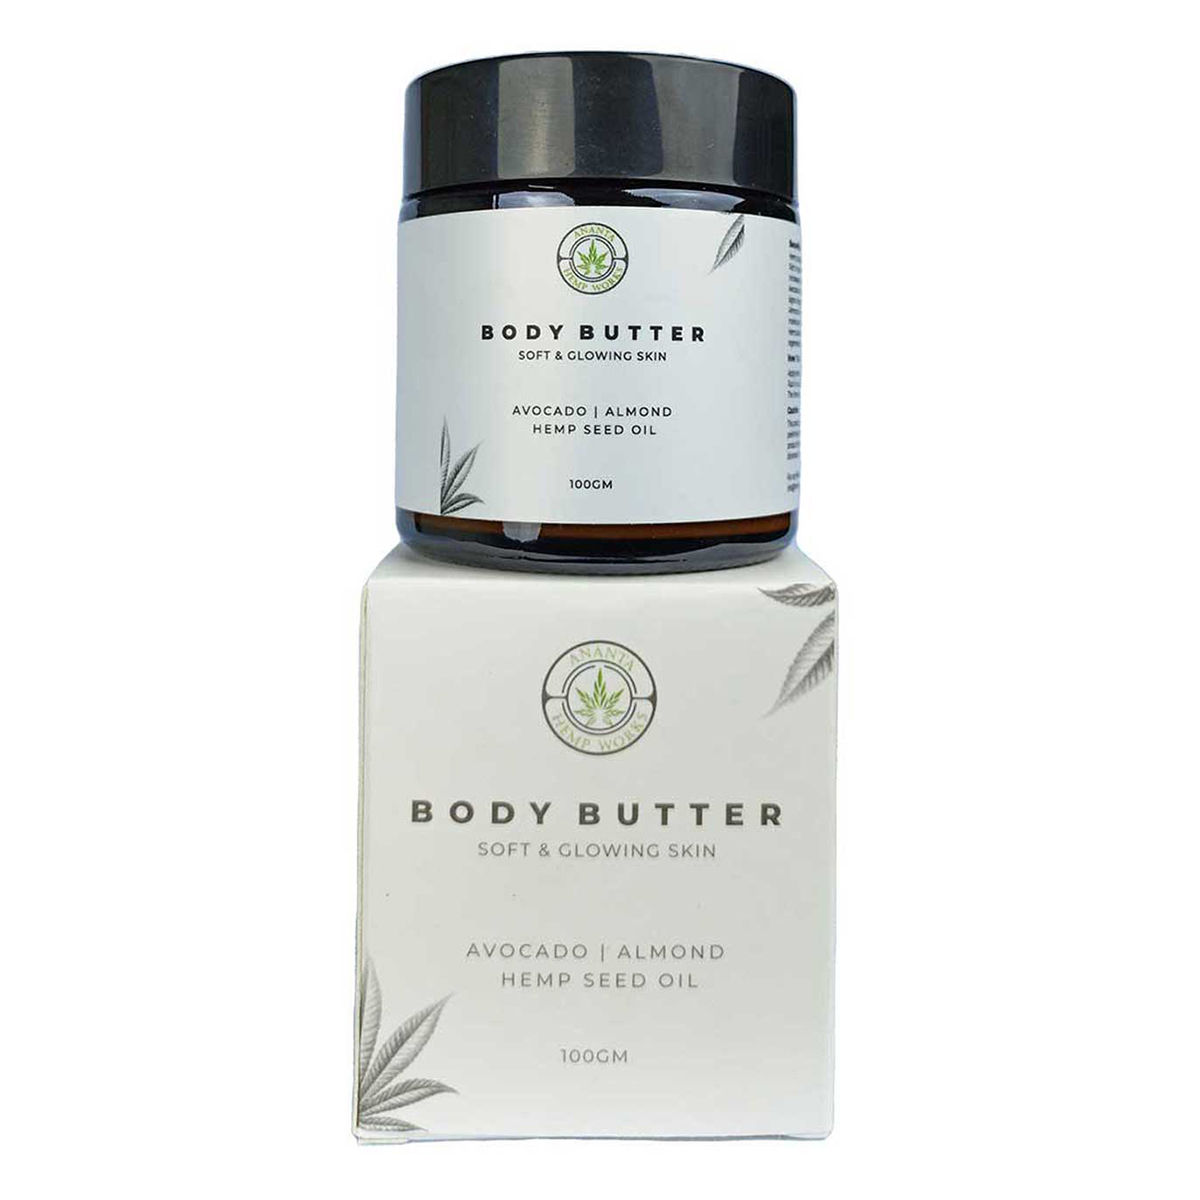 Ananta Hemp Body Butter 100 Gm Price Uses Side Effects Composition